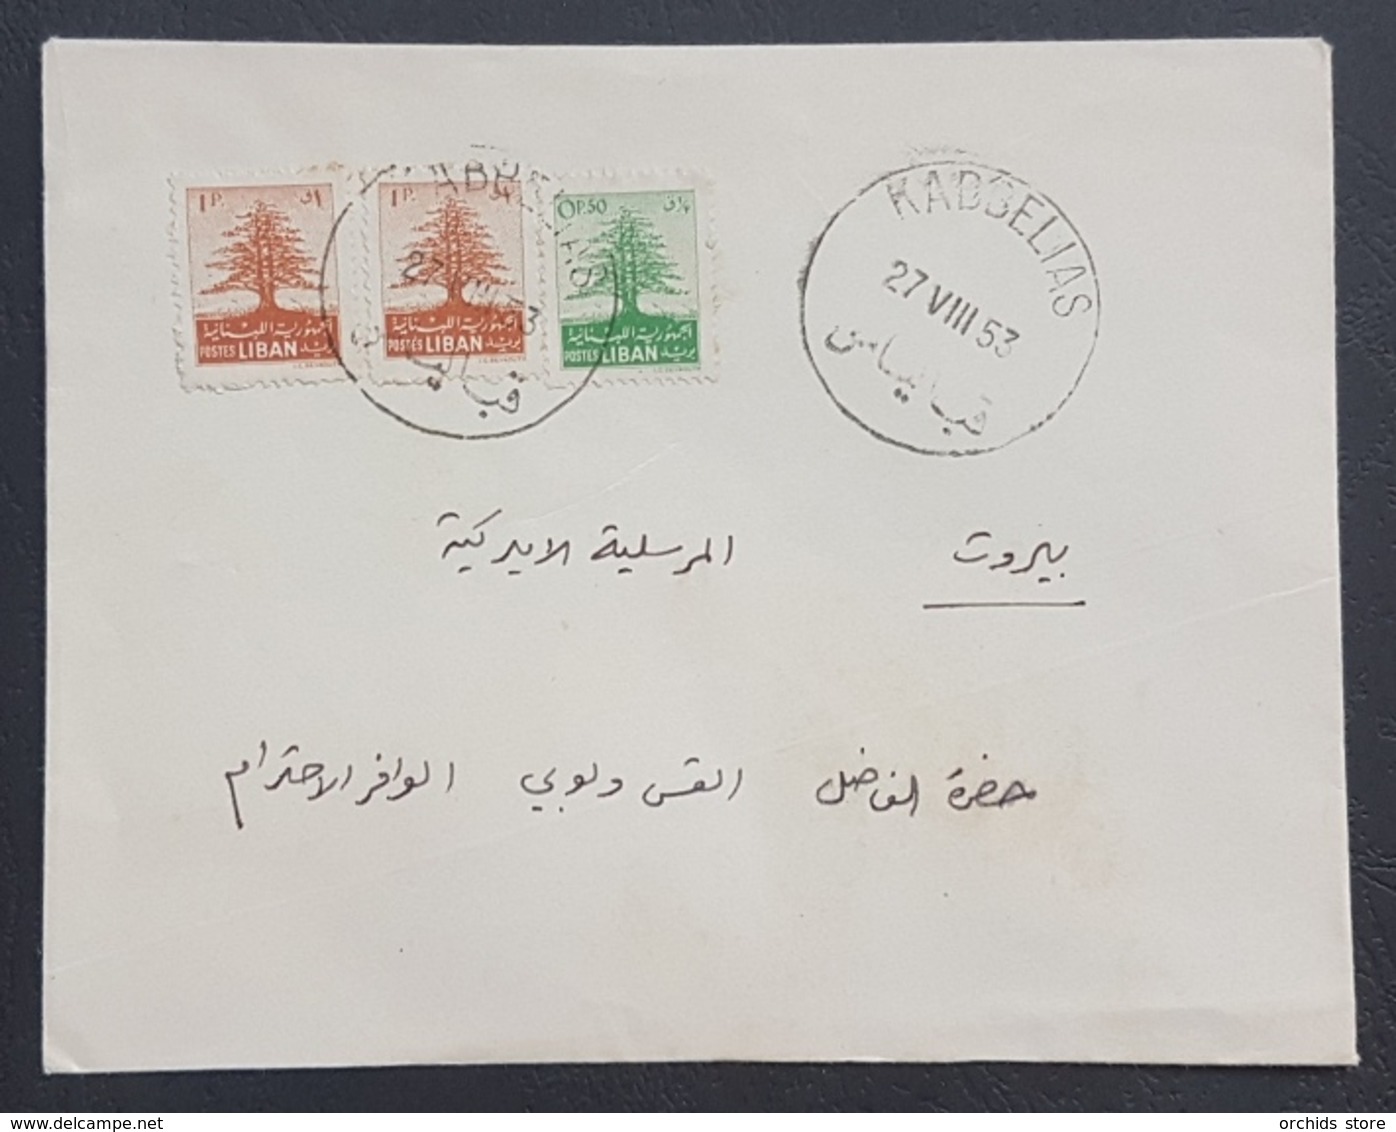 BL Lebanon Xtrmly Rare 1948 & 1950 Rare Cancels And Clear Strikes On Two Covers, 2 Types, "KAB ELIAS" Alphabets & "KABBE - Lebanon